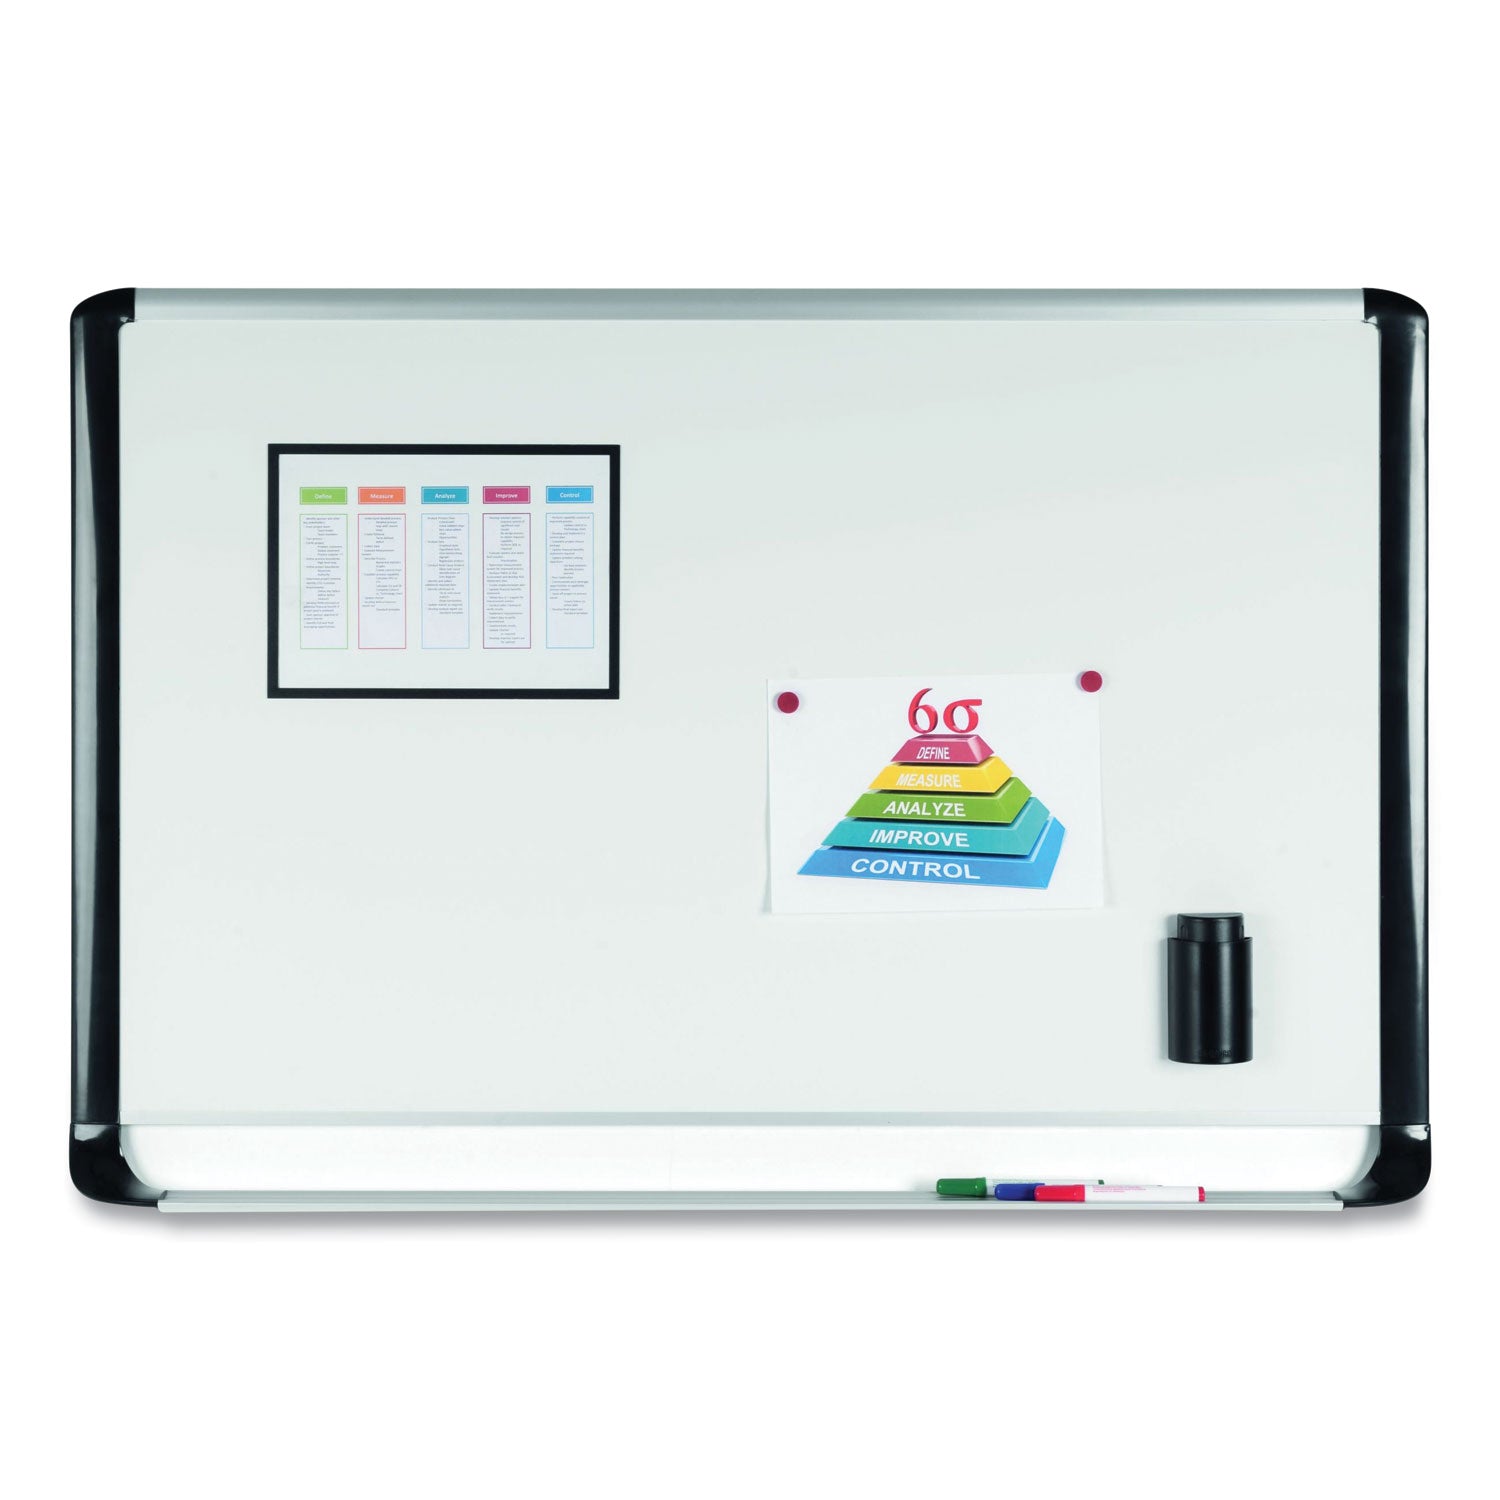 Pure Platinum Magnetic Dry Erase Board, 96 x 48, White Surface, Silver/Black Aluminum Frame - 